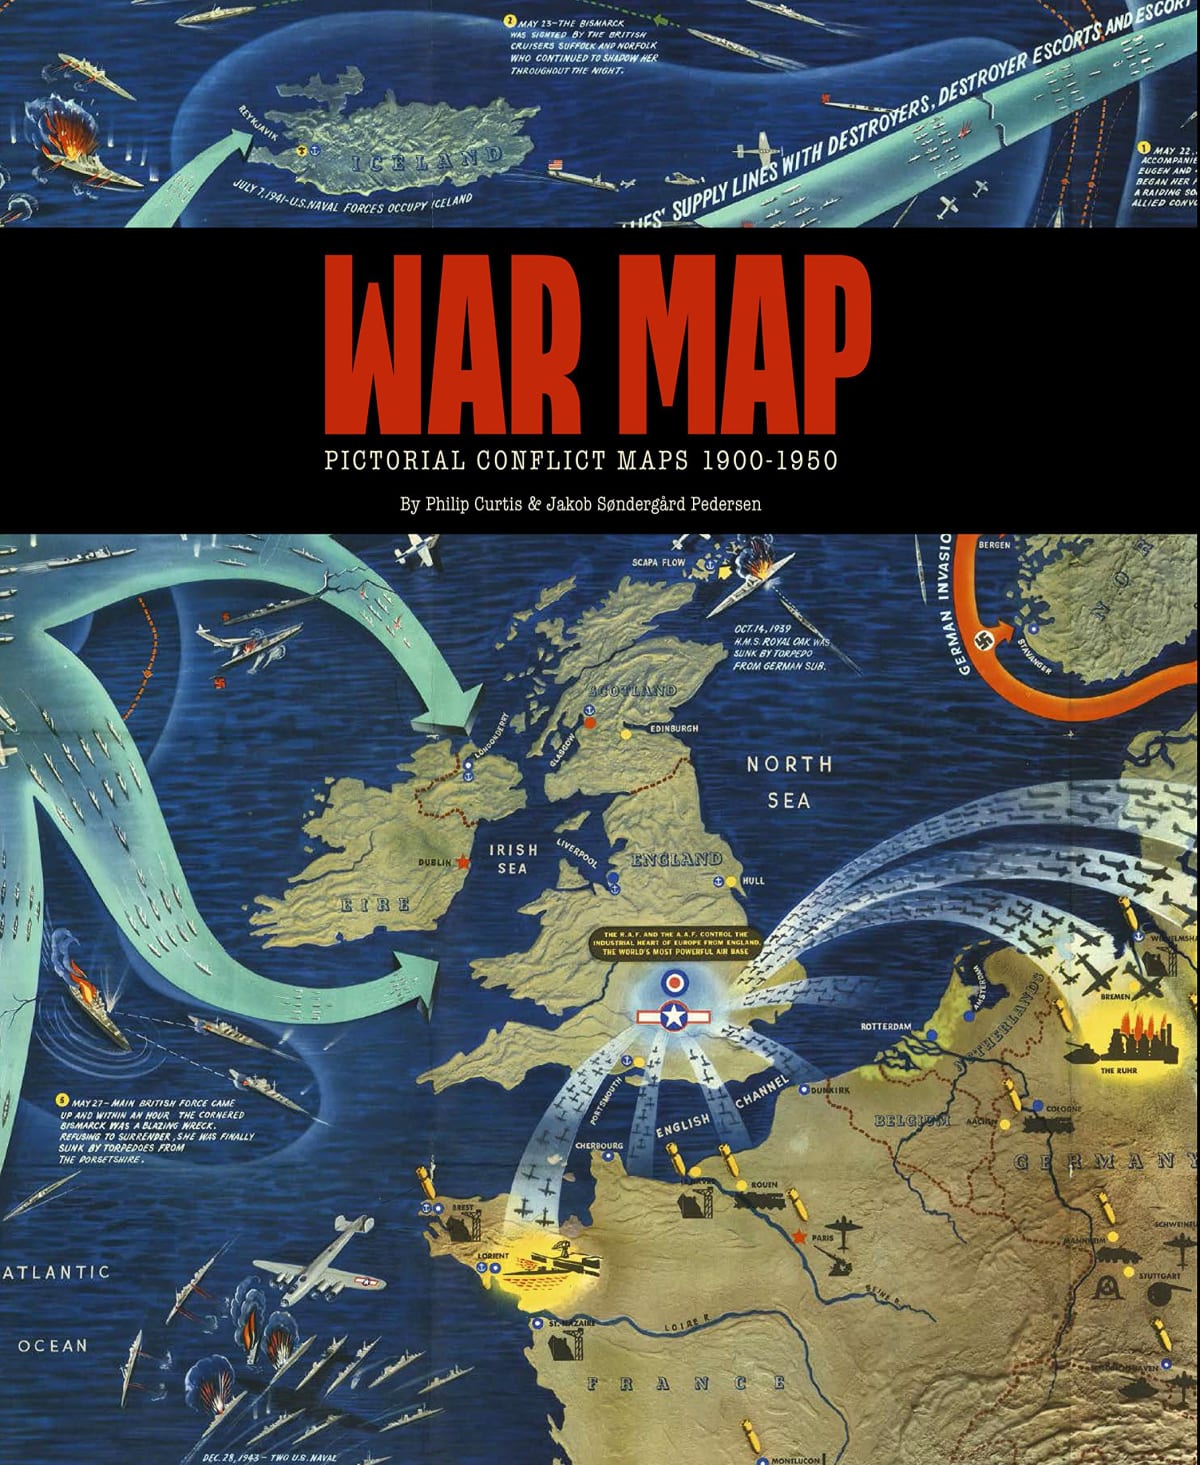 War Map, Pictorial Conflict Maps, 1900-1950